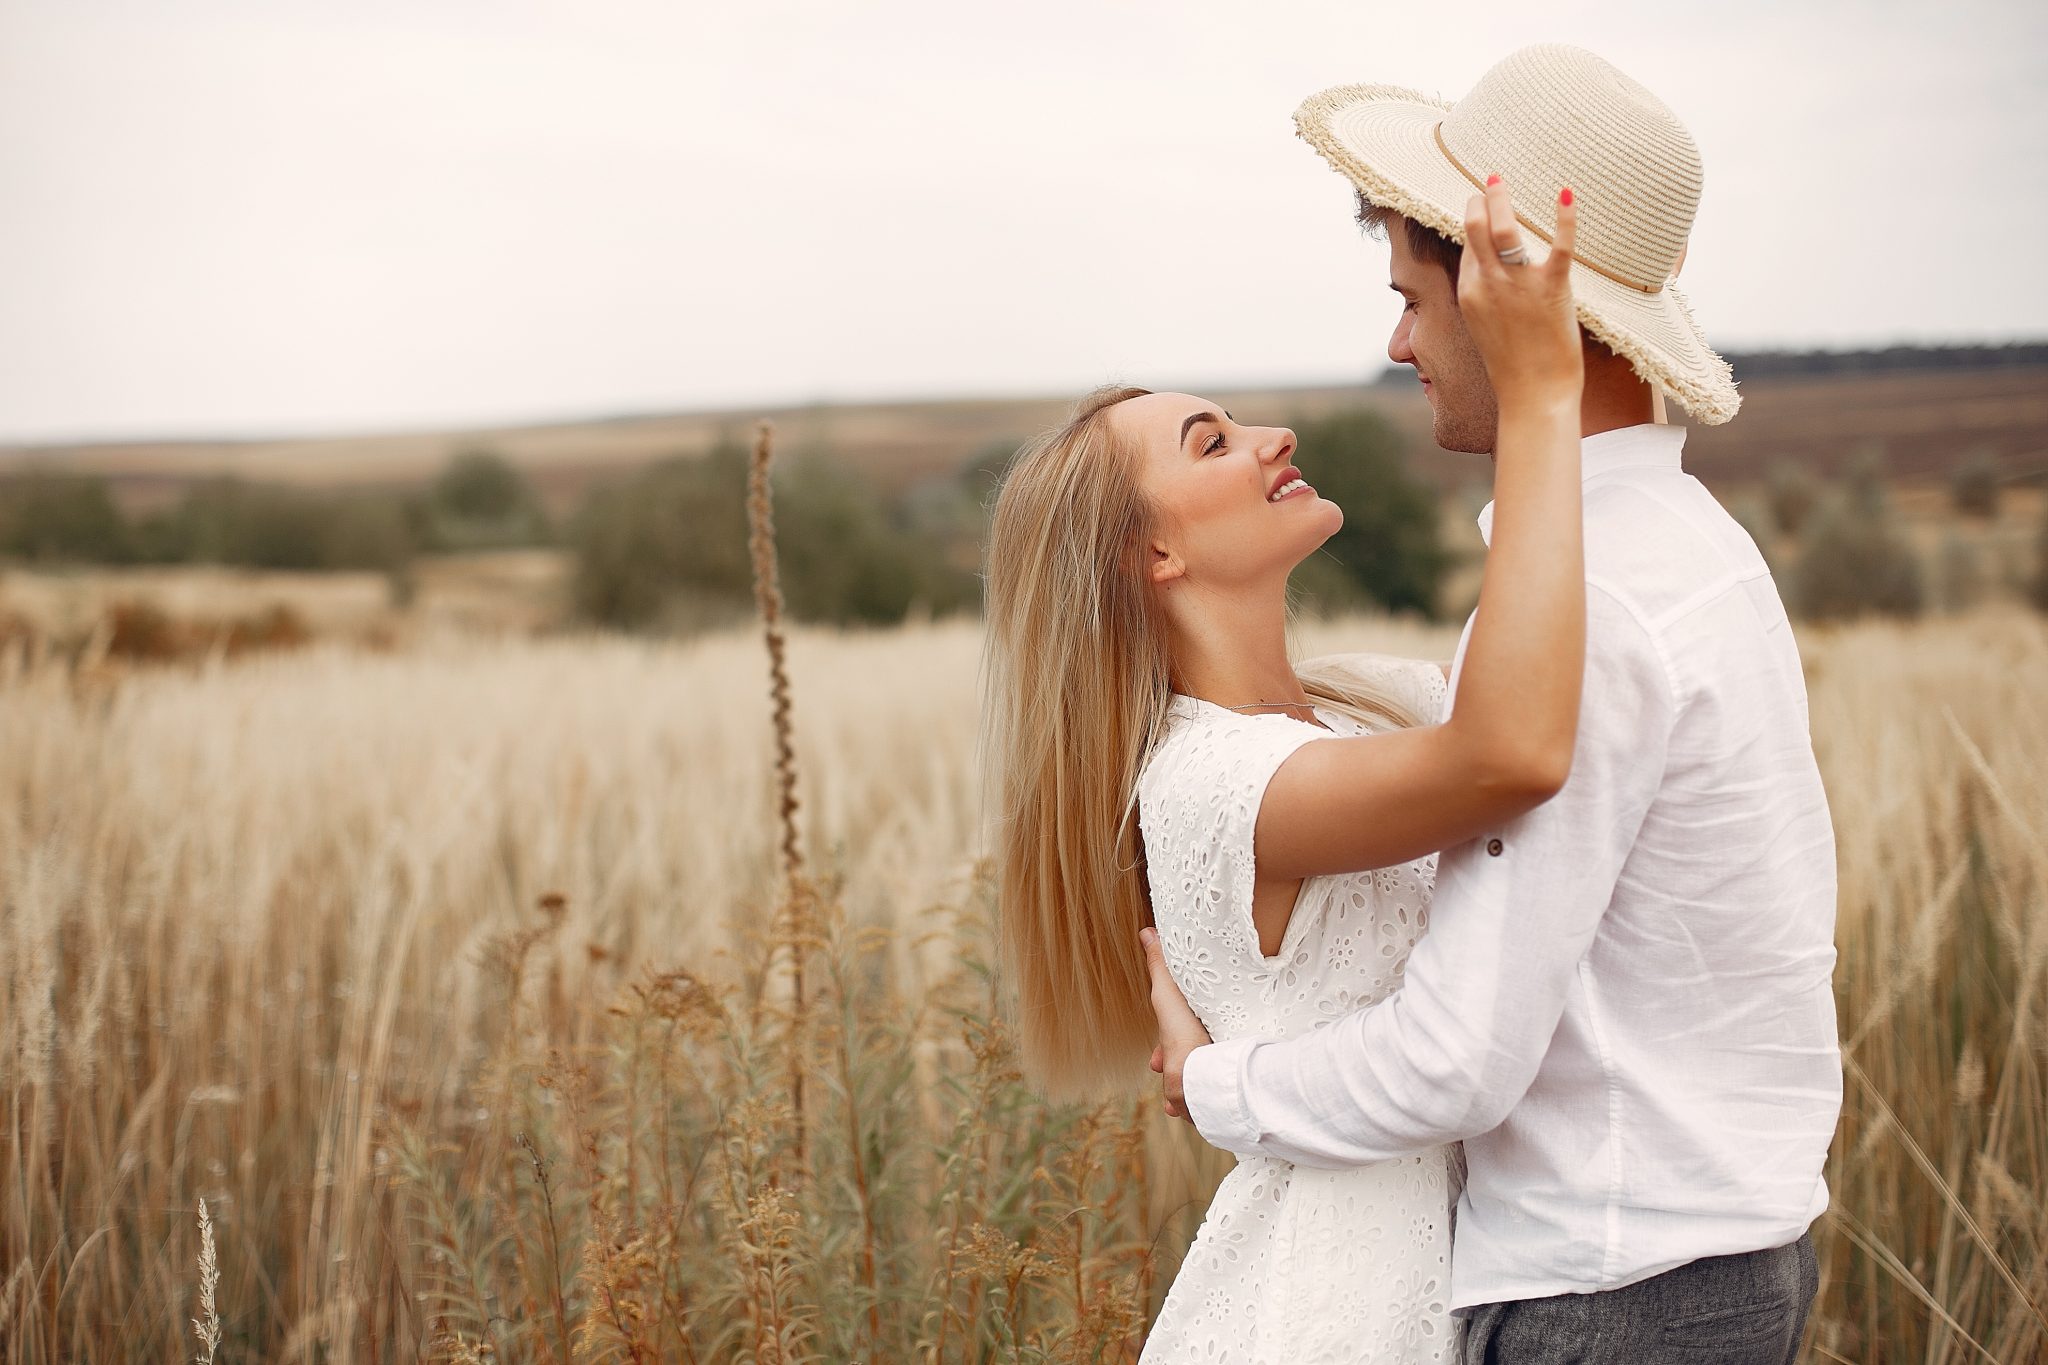 Cute couple in a field. Lady in a white dress. Guy in a white shirt